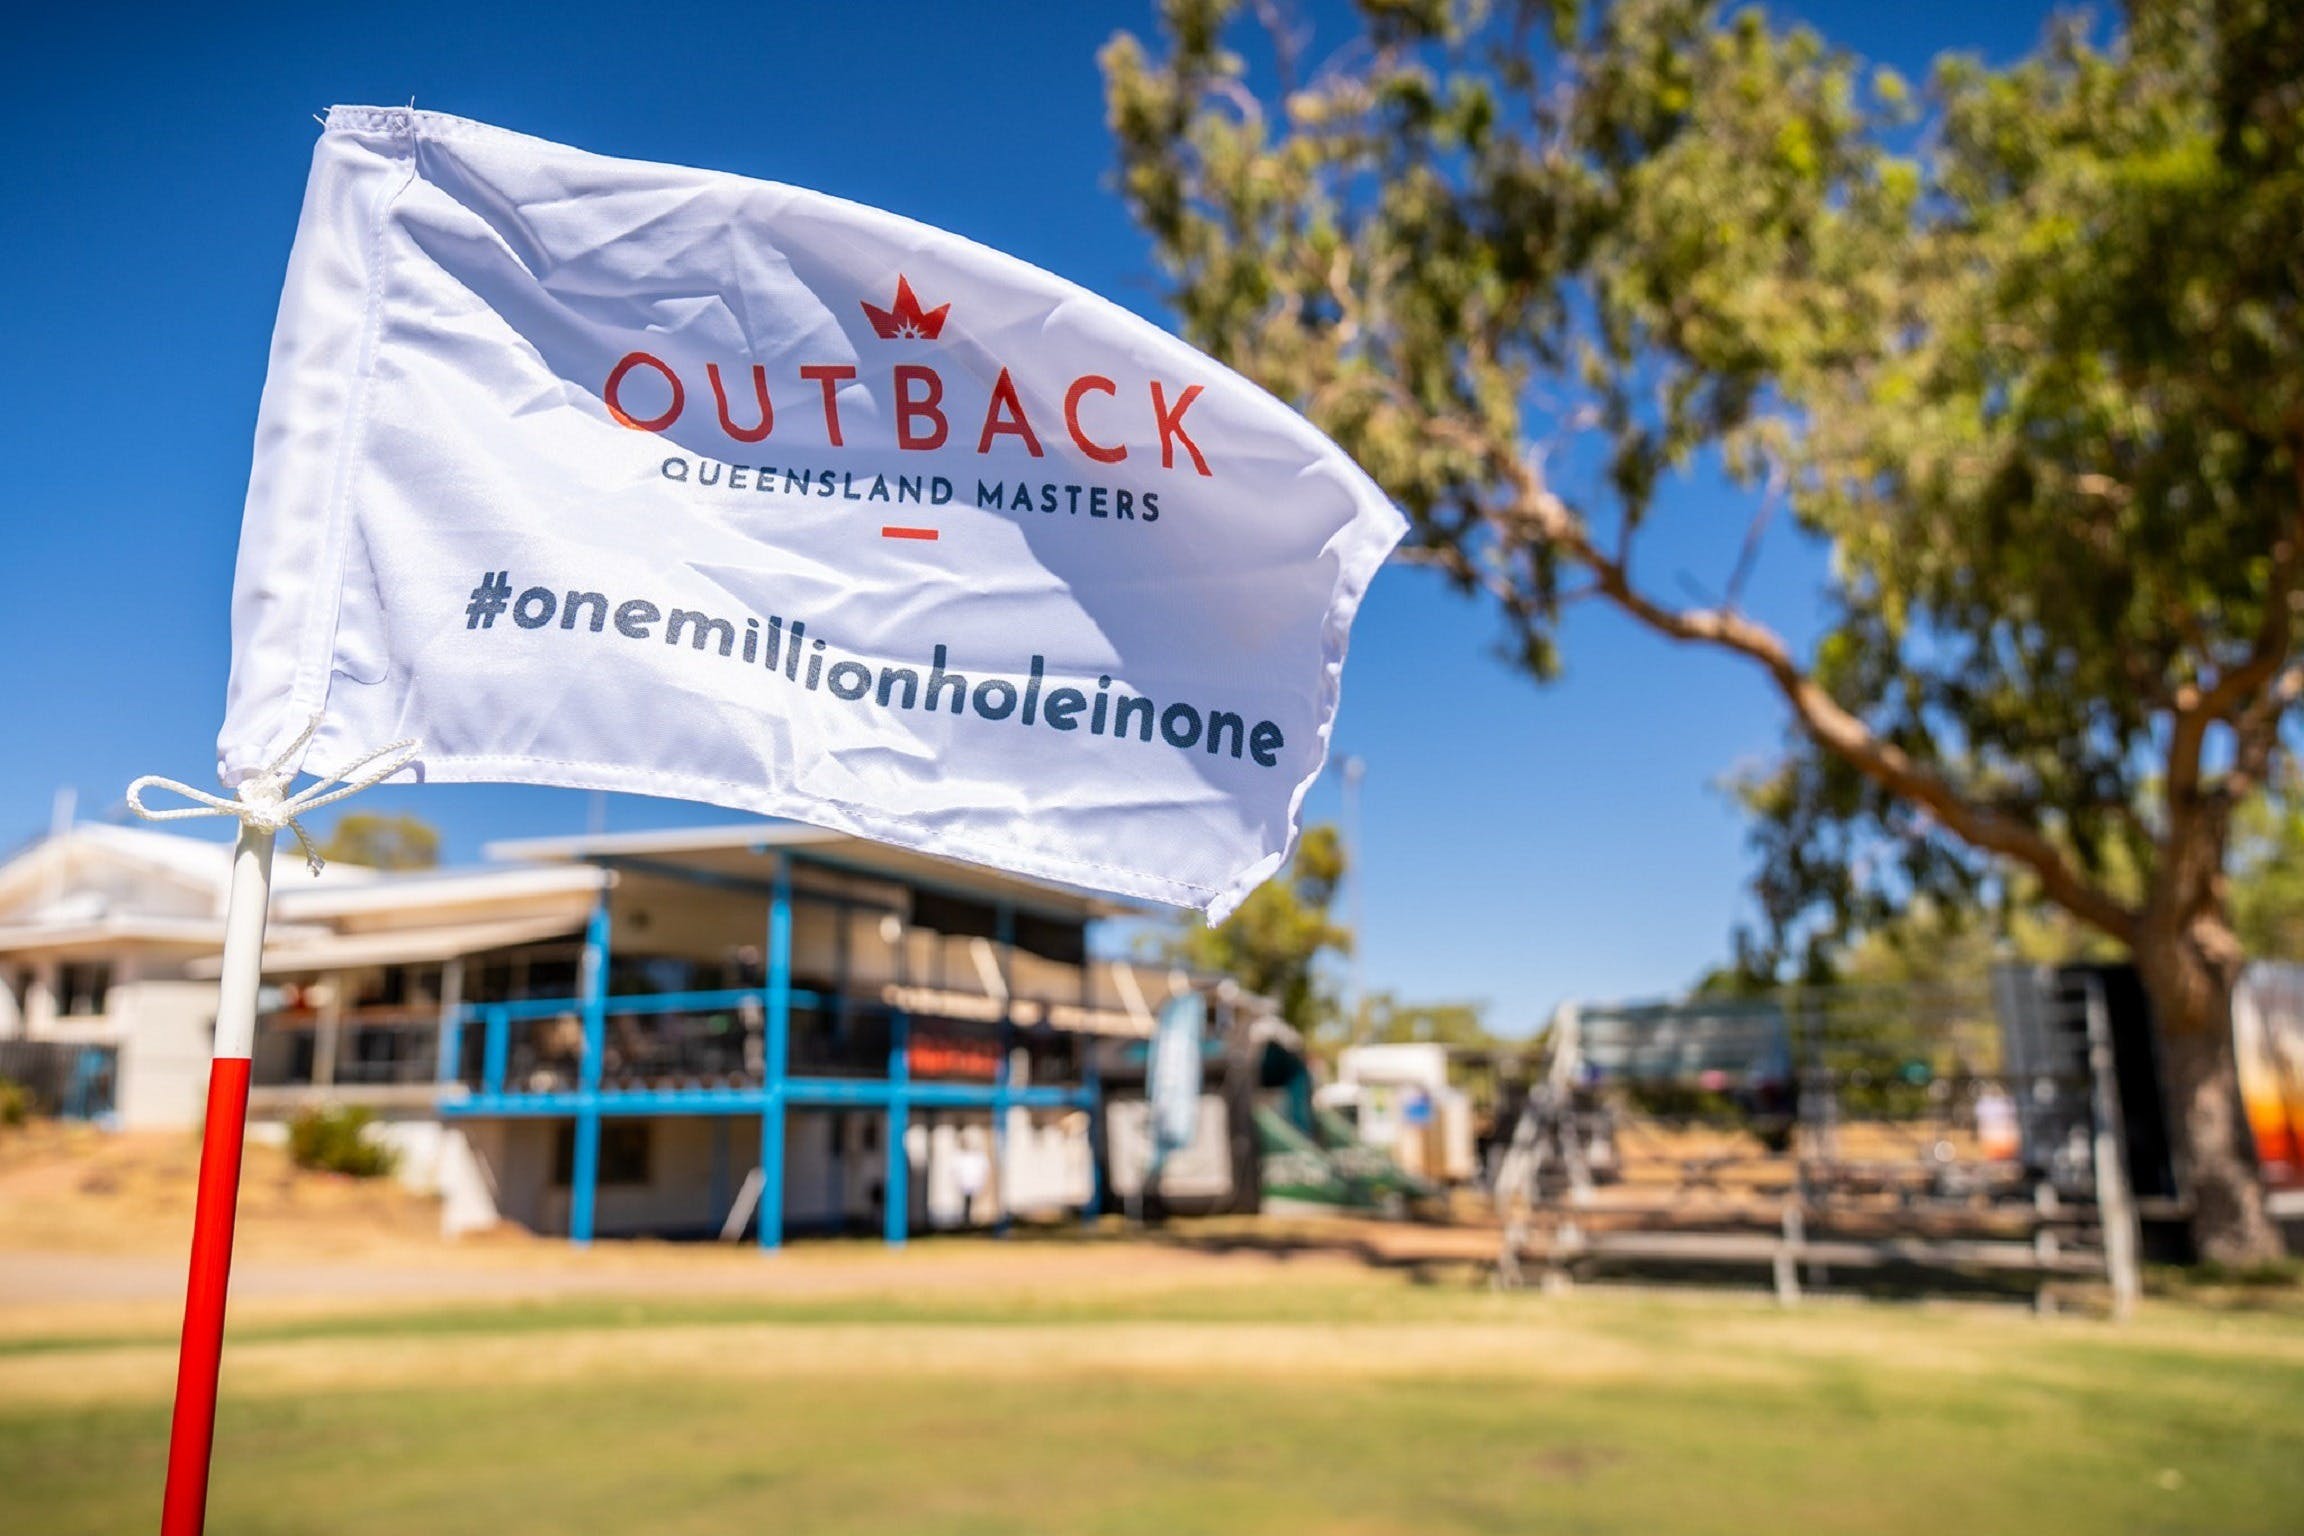 Outback Queensland Masters Charleville Leg 2021 - WA Accommodation